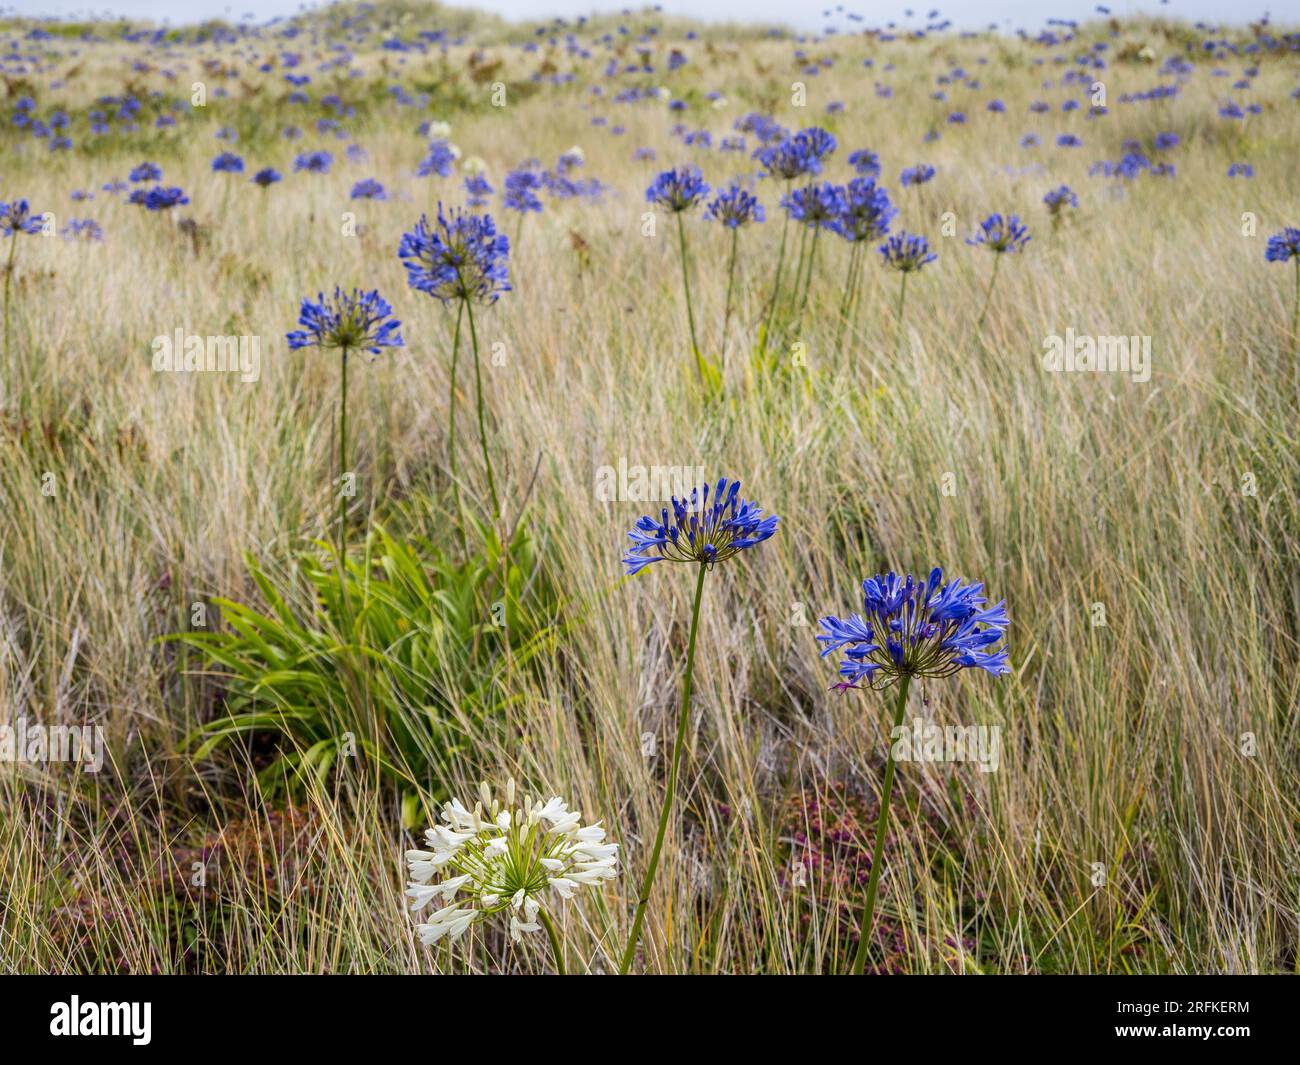 Agapanthus Umbellatus, Lilly of The Nile, Growing on Sand Dunes, nr Corn Near Road, Tresco, Isles of Scilly, Cornwall, England, UK, GB. Stock Photo